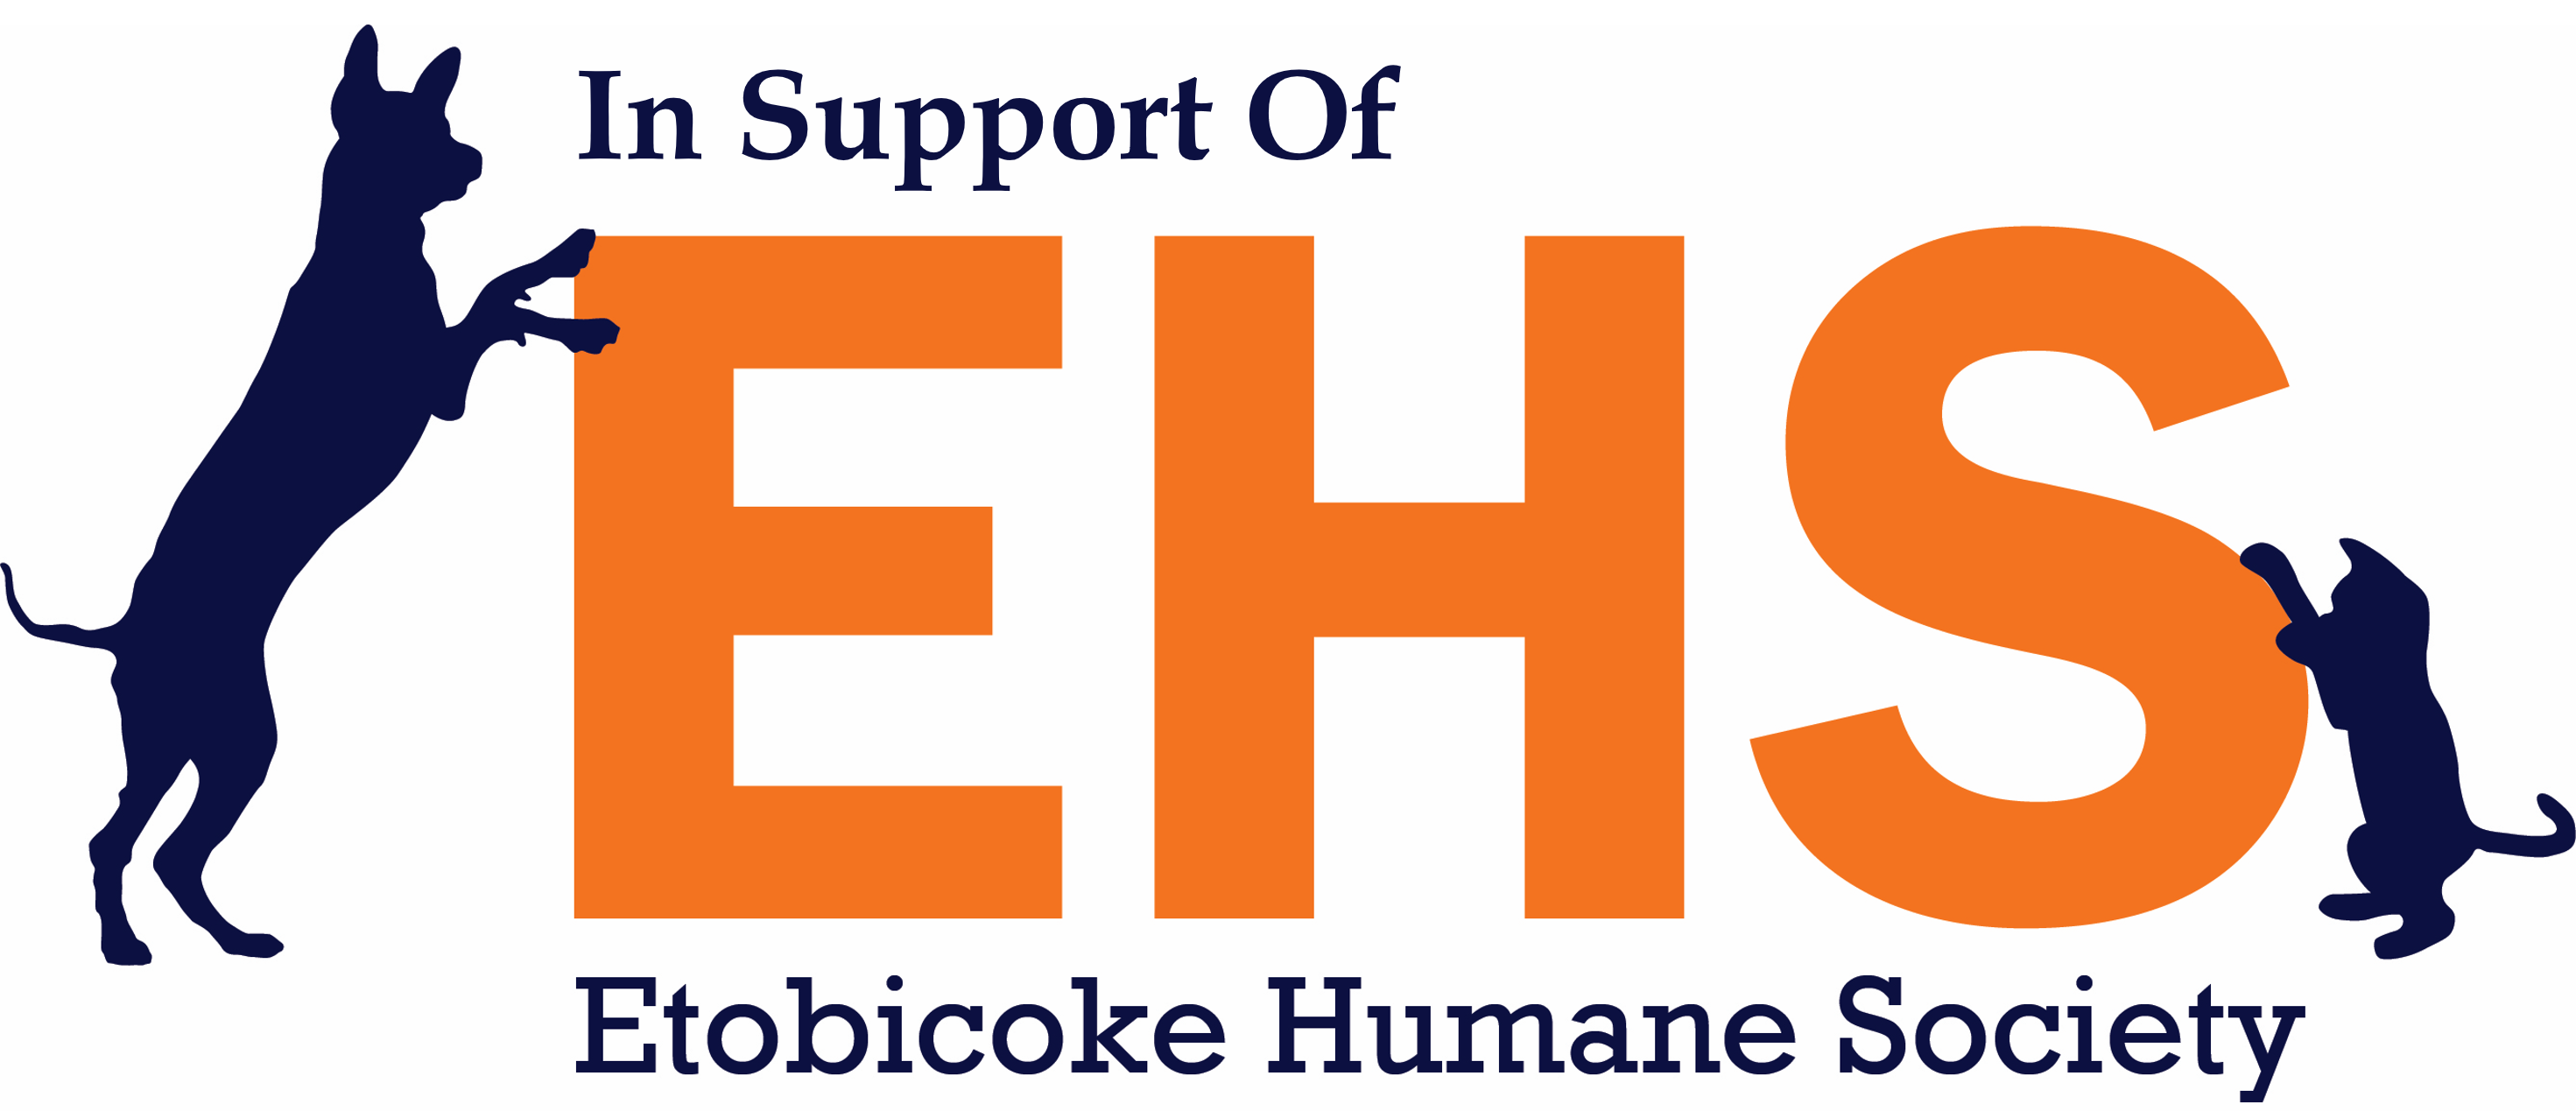 In Support of the Etobicoke Humane Society